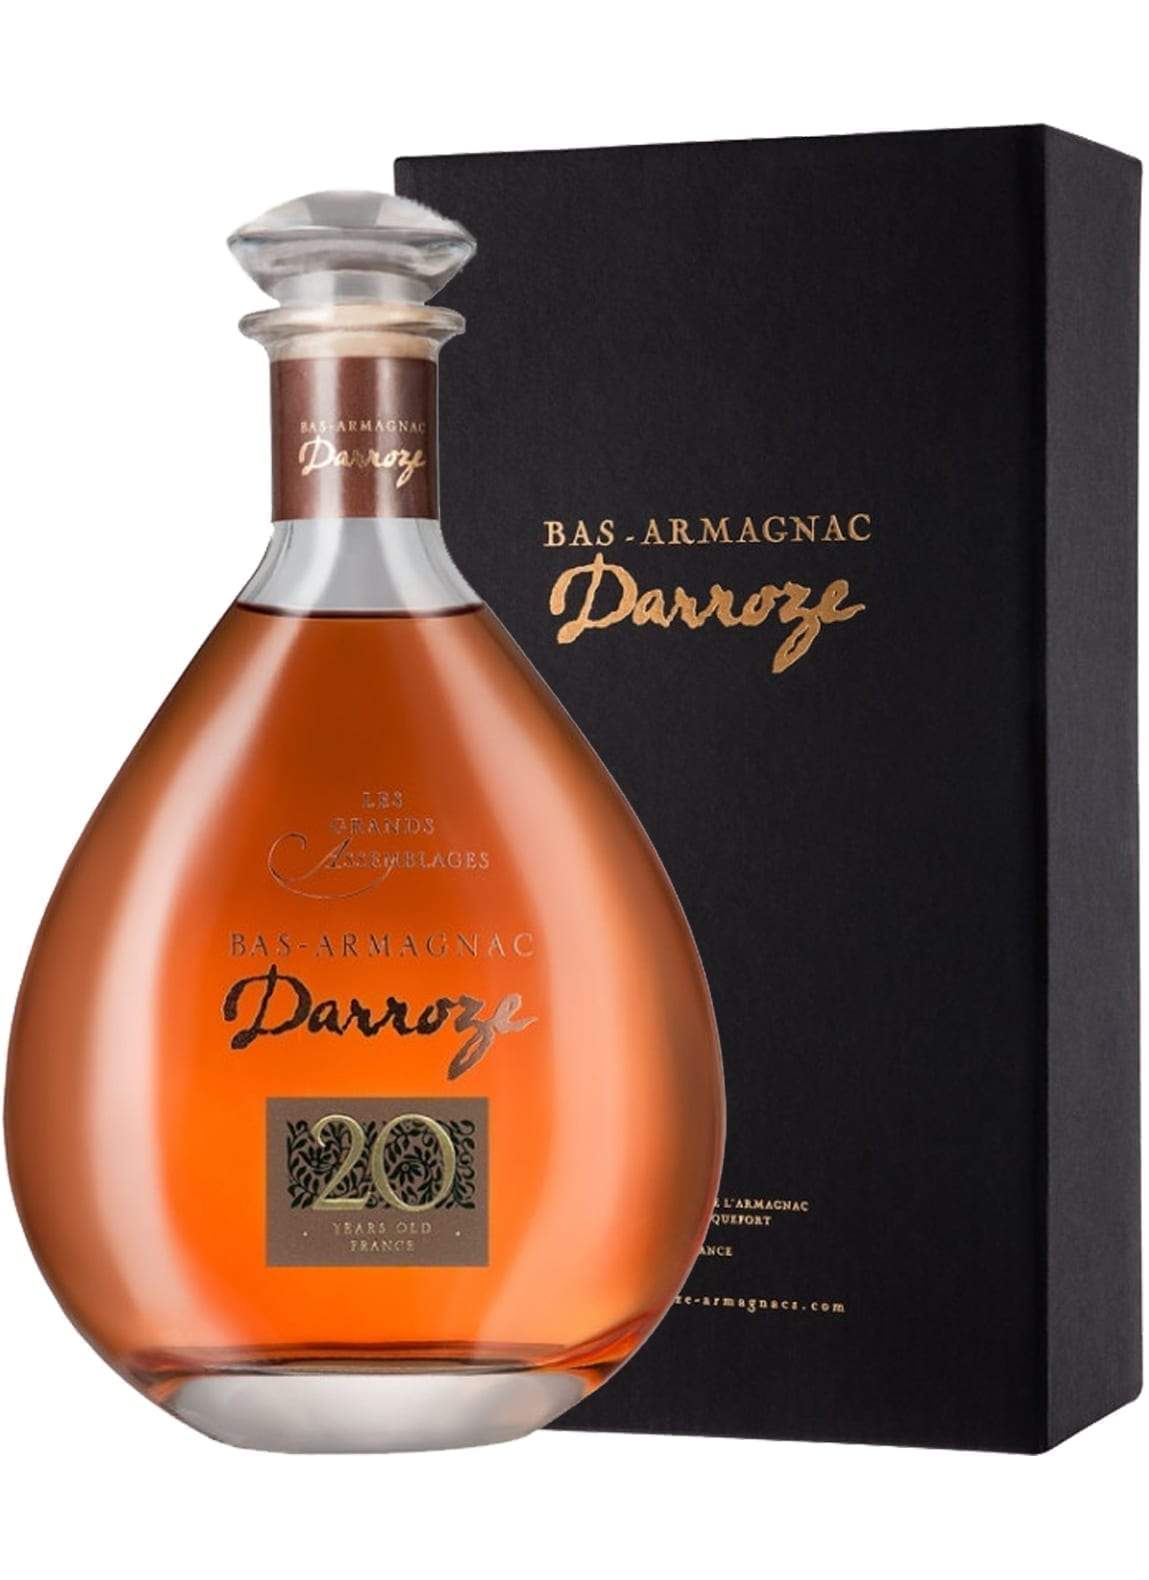 Darroze Grand Bas Armagnac Les Grands Assemblages 20 years Carafe 43% 700ml | Brandy | Shop online at Spirits of France